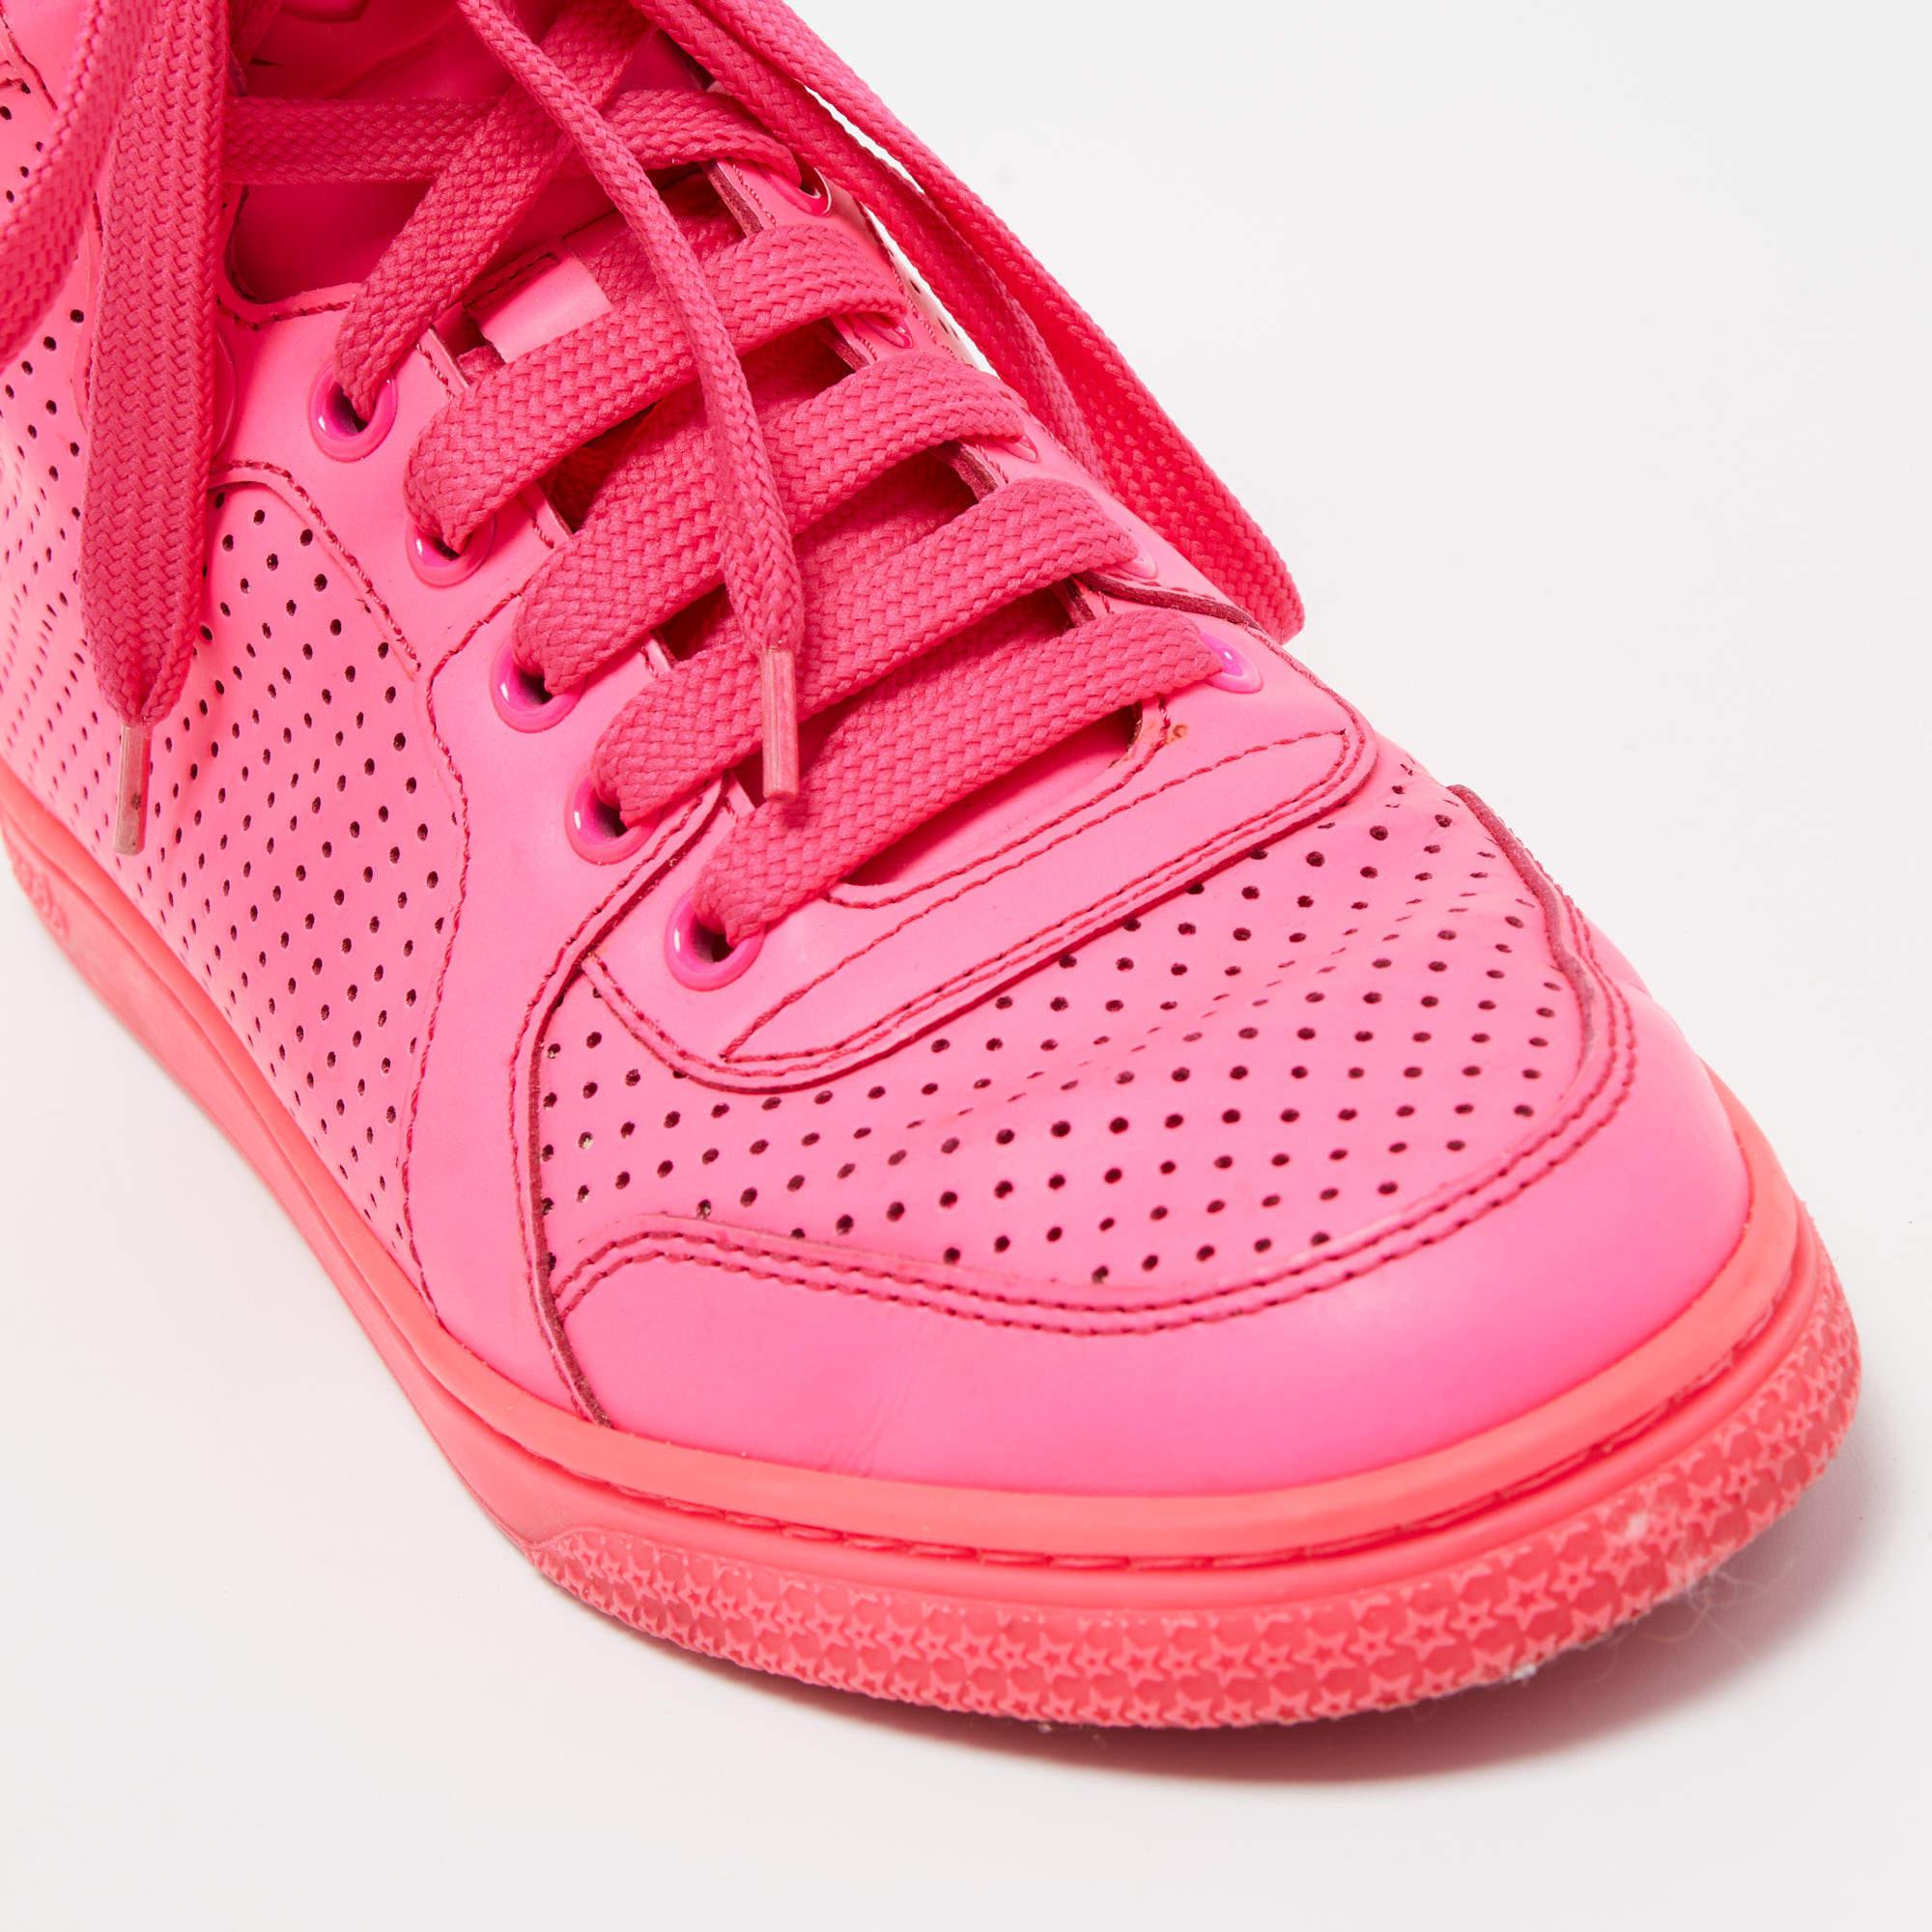 Gucci Neon Pink Perforated Leather Coda High Top Sneakers Size 35.5 For Sale 1